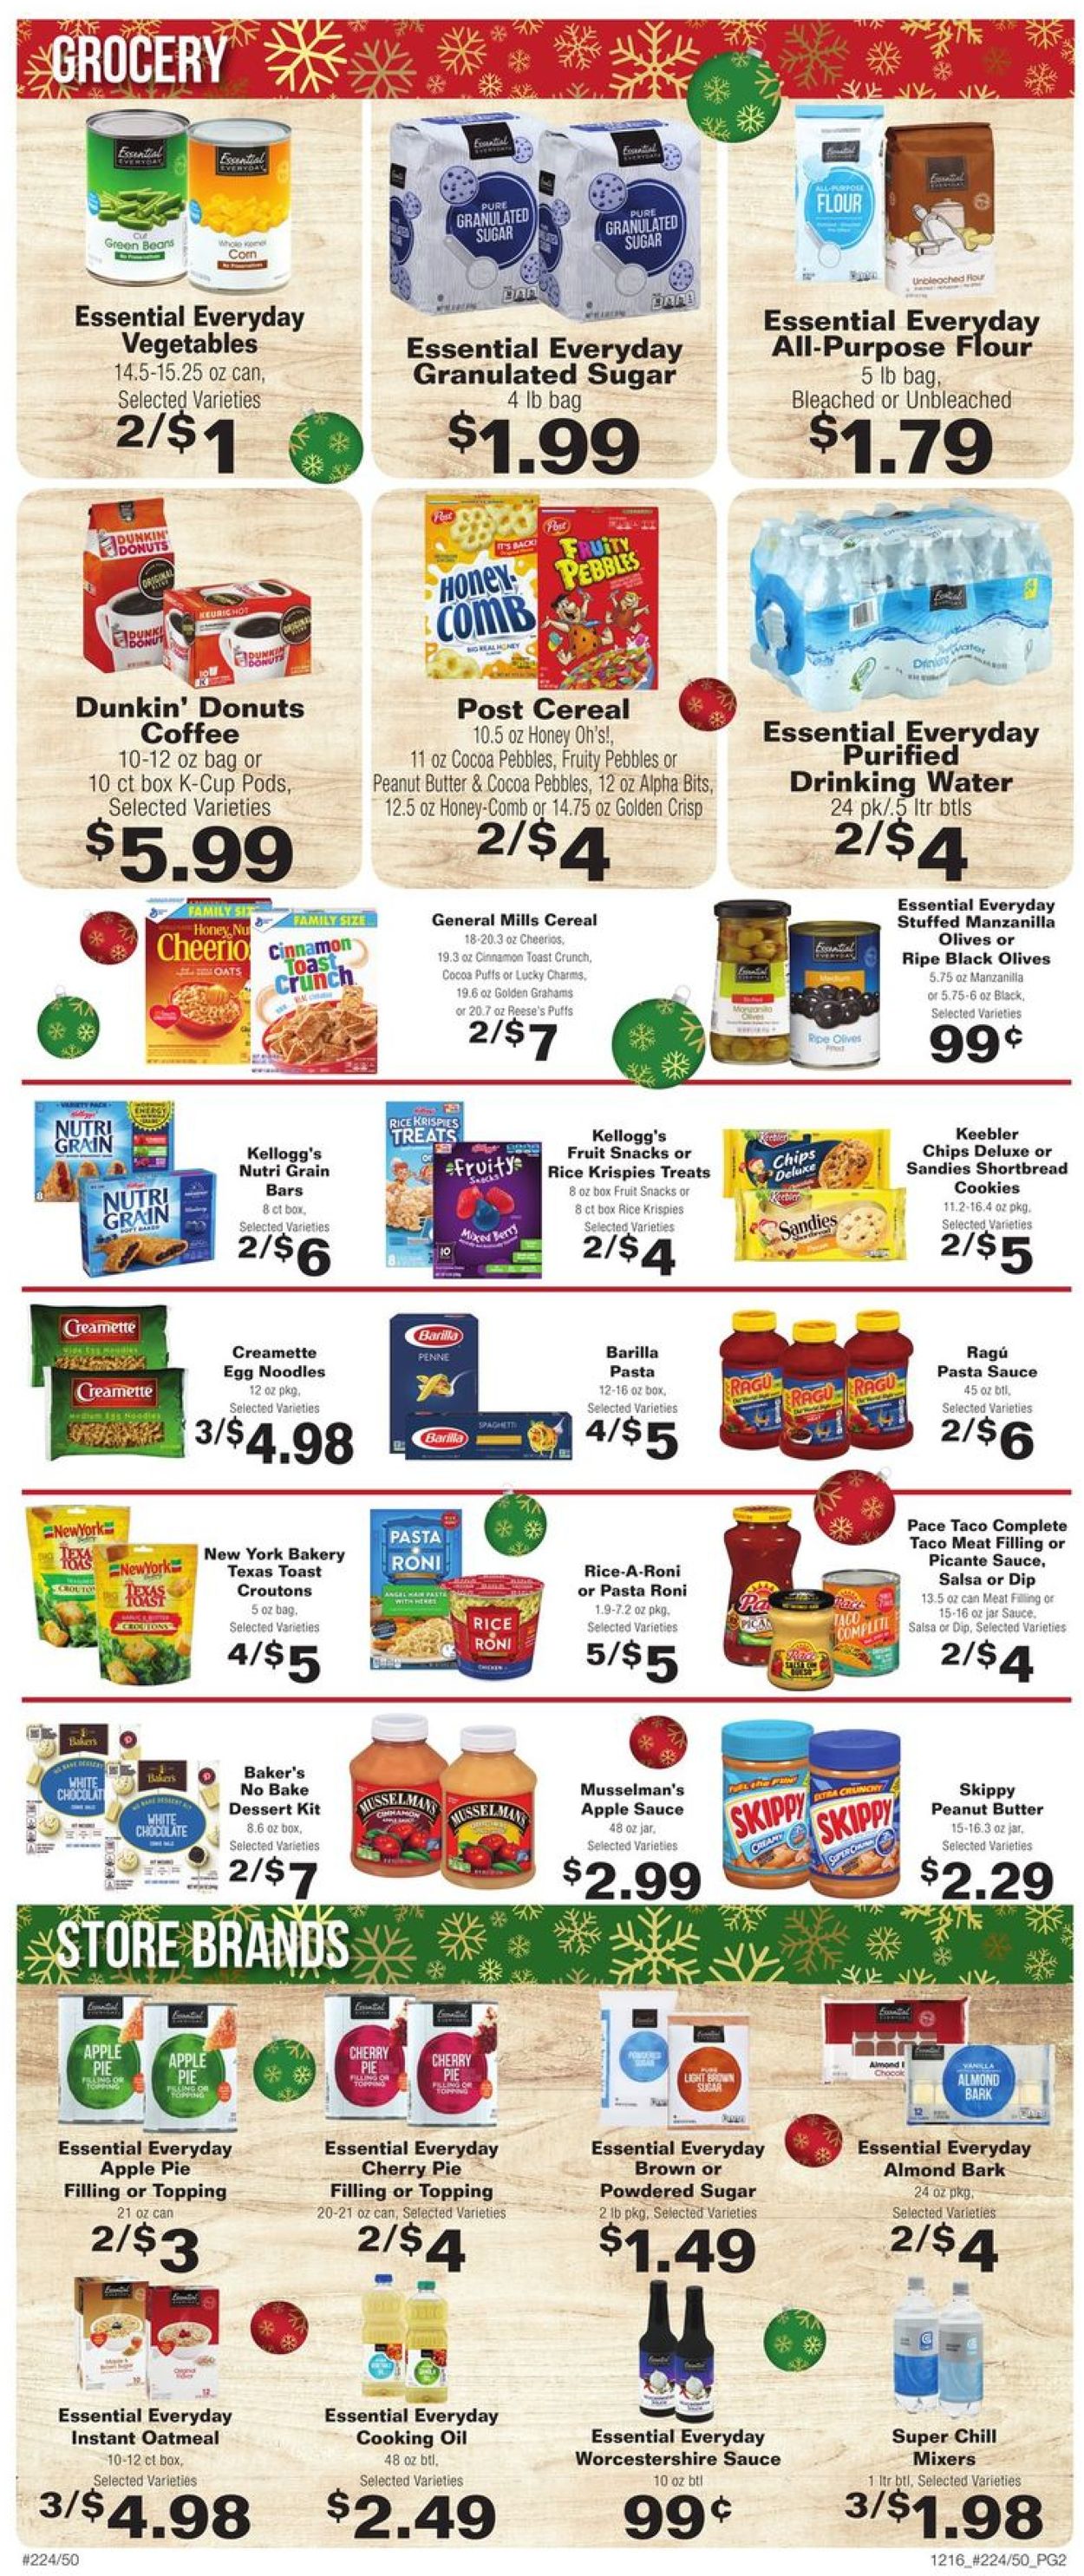 Catalogue County Market - Christmas Ad 2019 from 12/16/2019